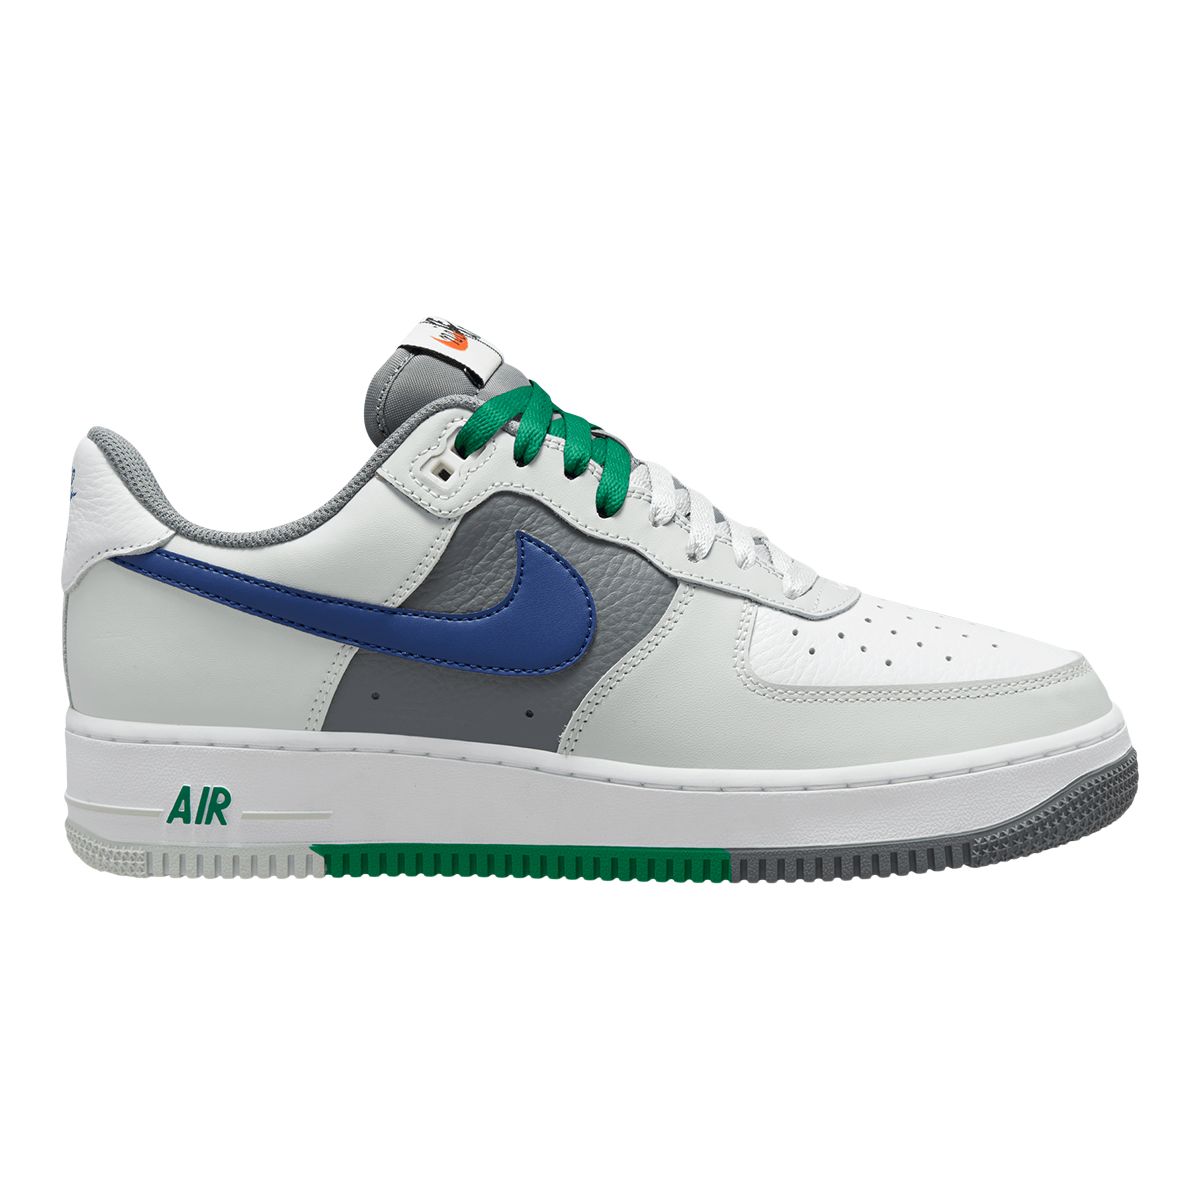 Image of Nike Men's Air Force 1 '07 LV8 RMX Shoes